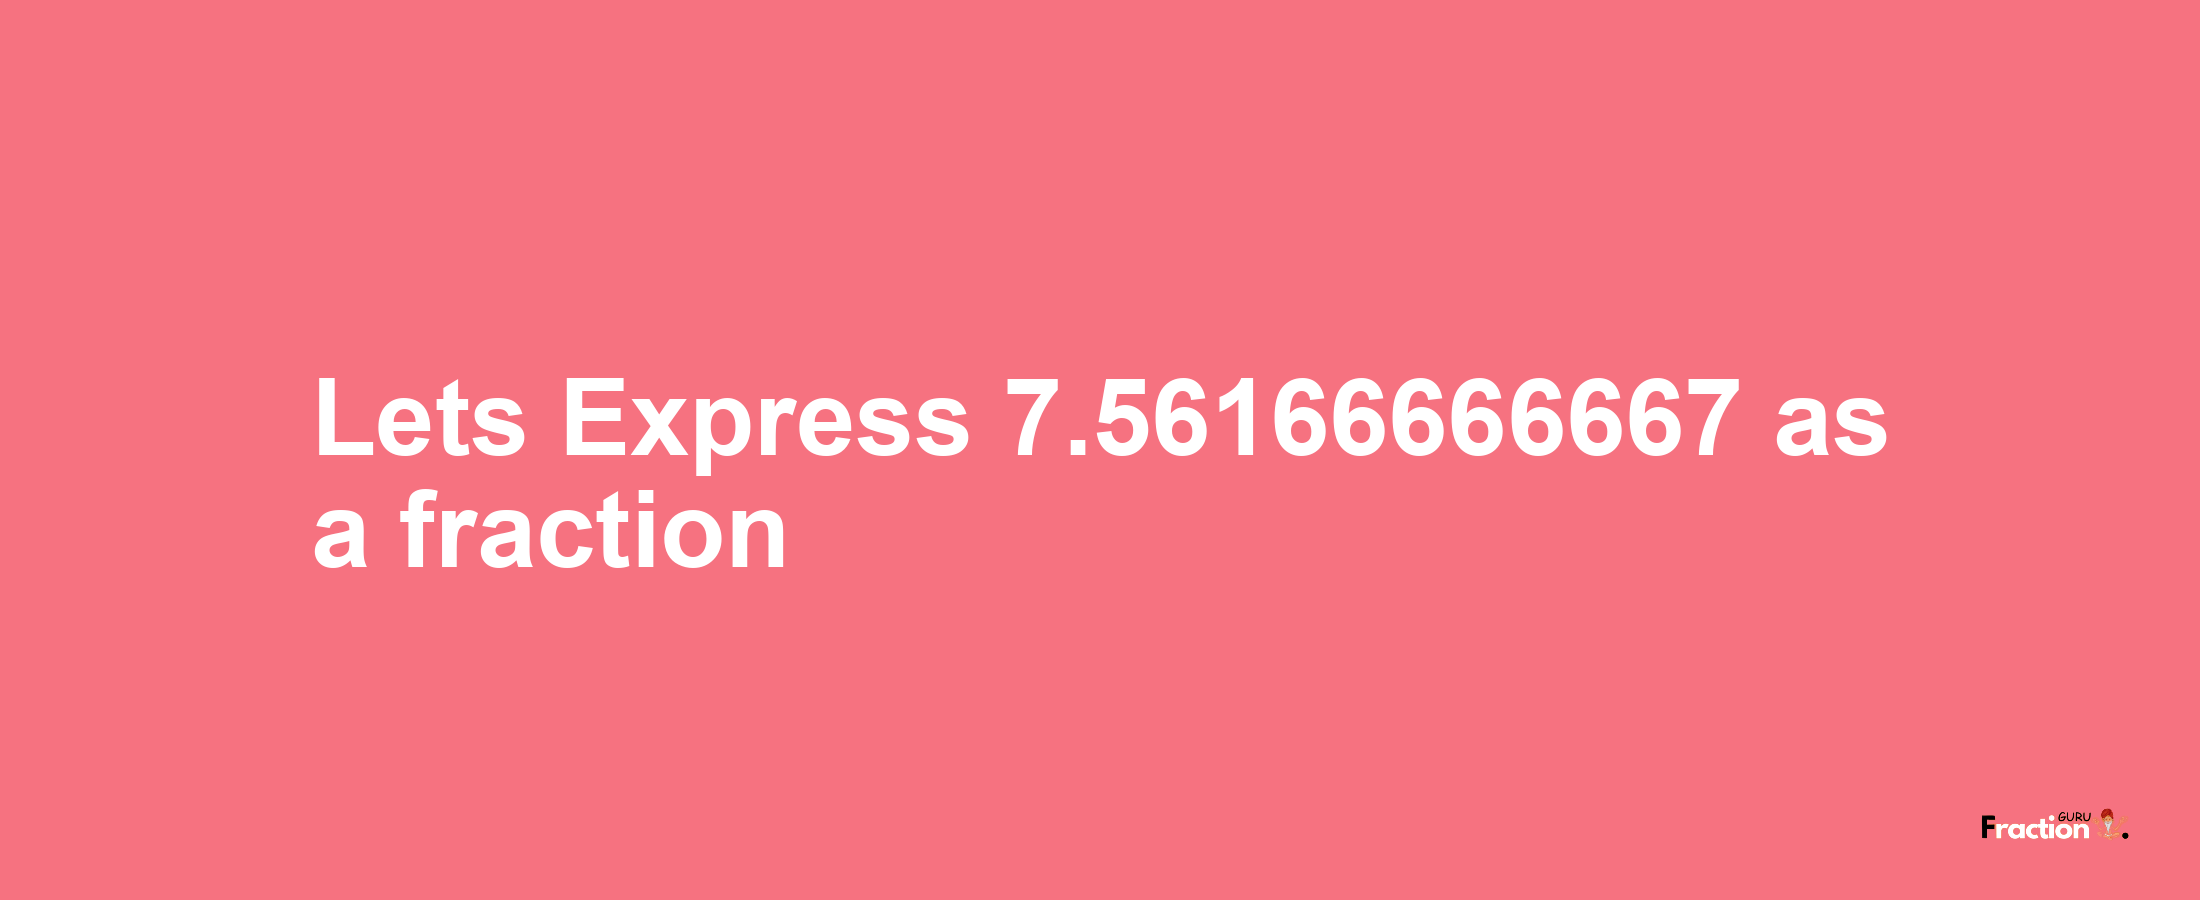 Lets Express 7.56166666667 as afraction